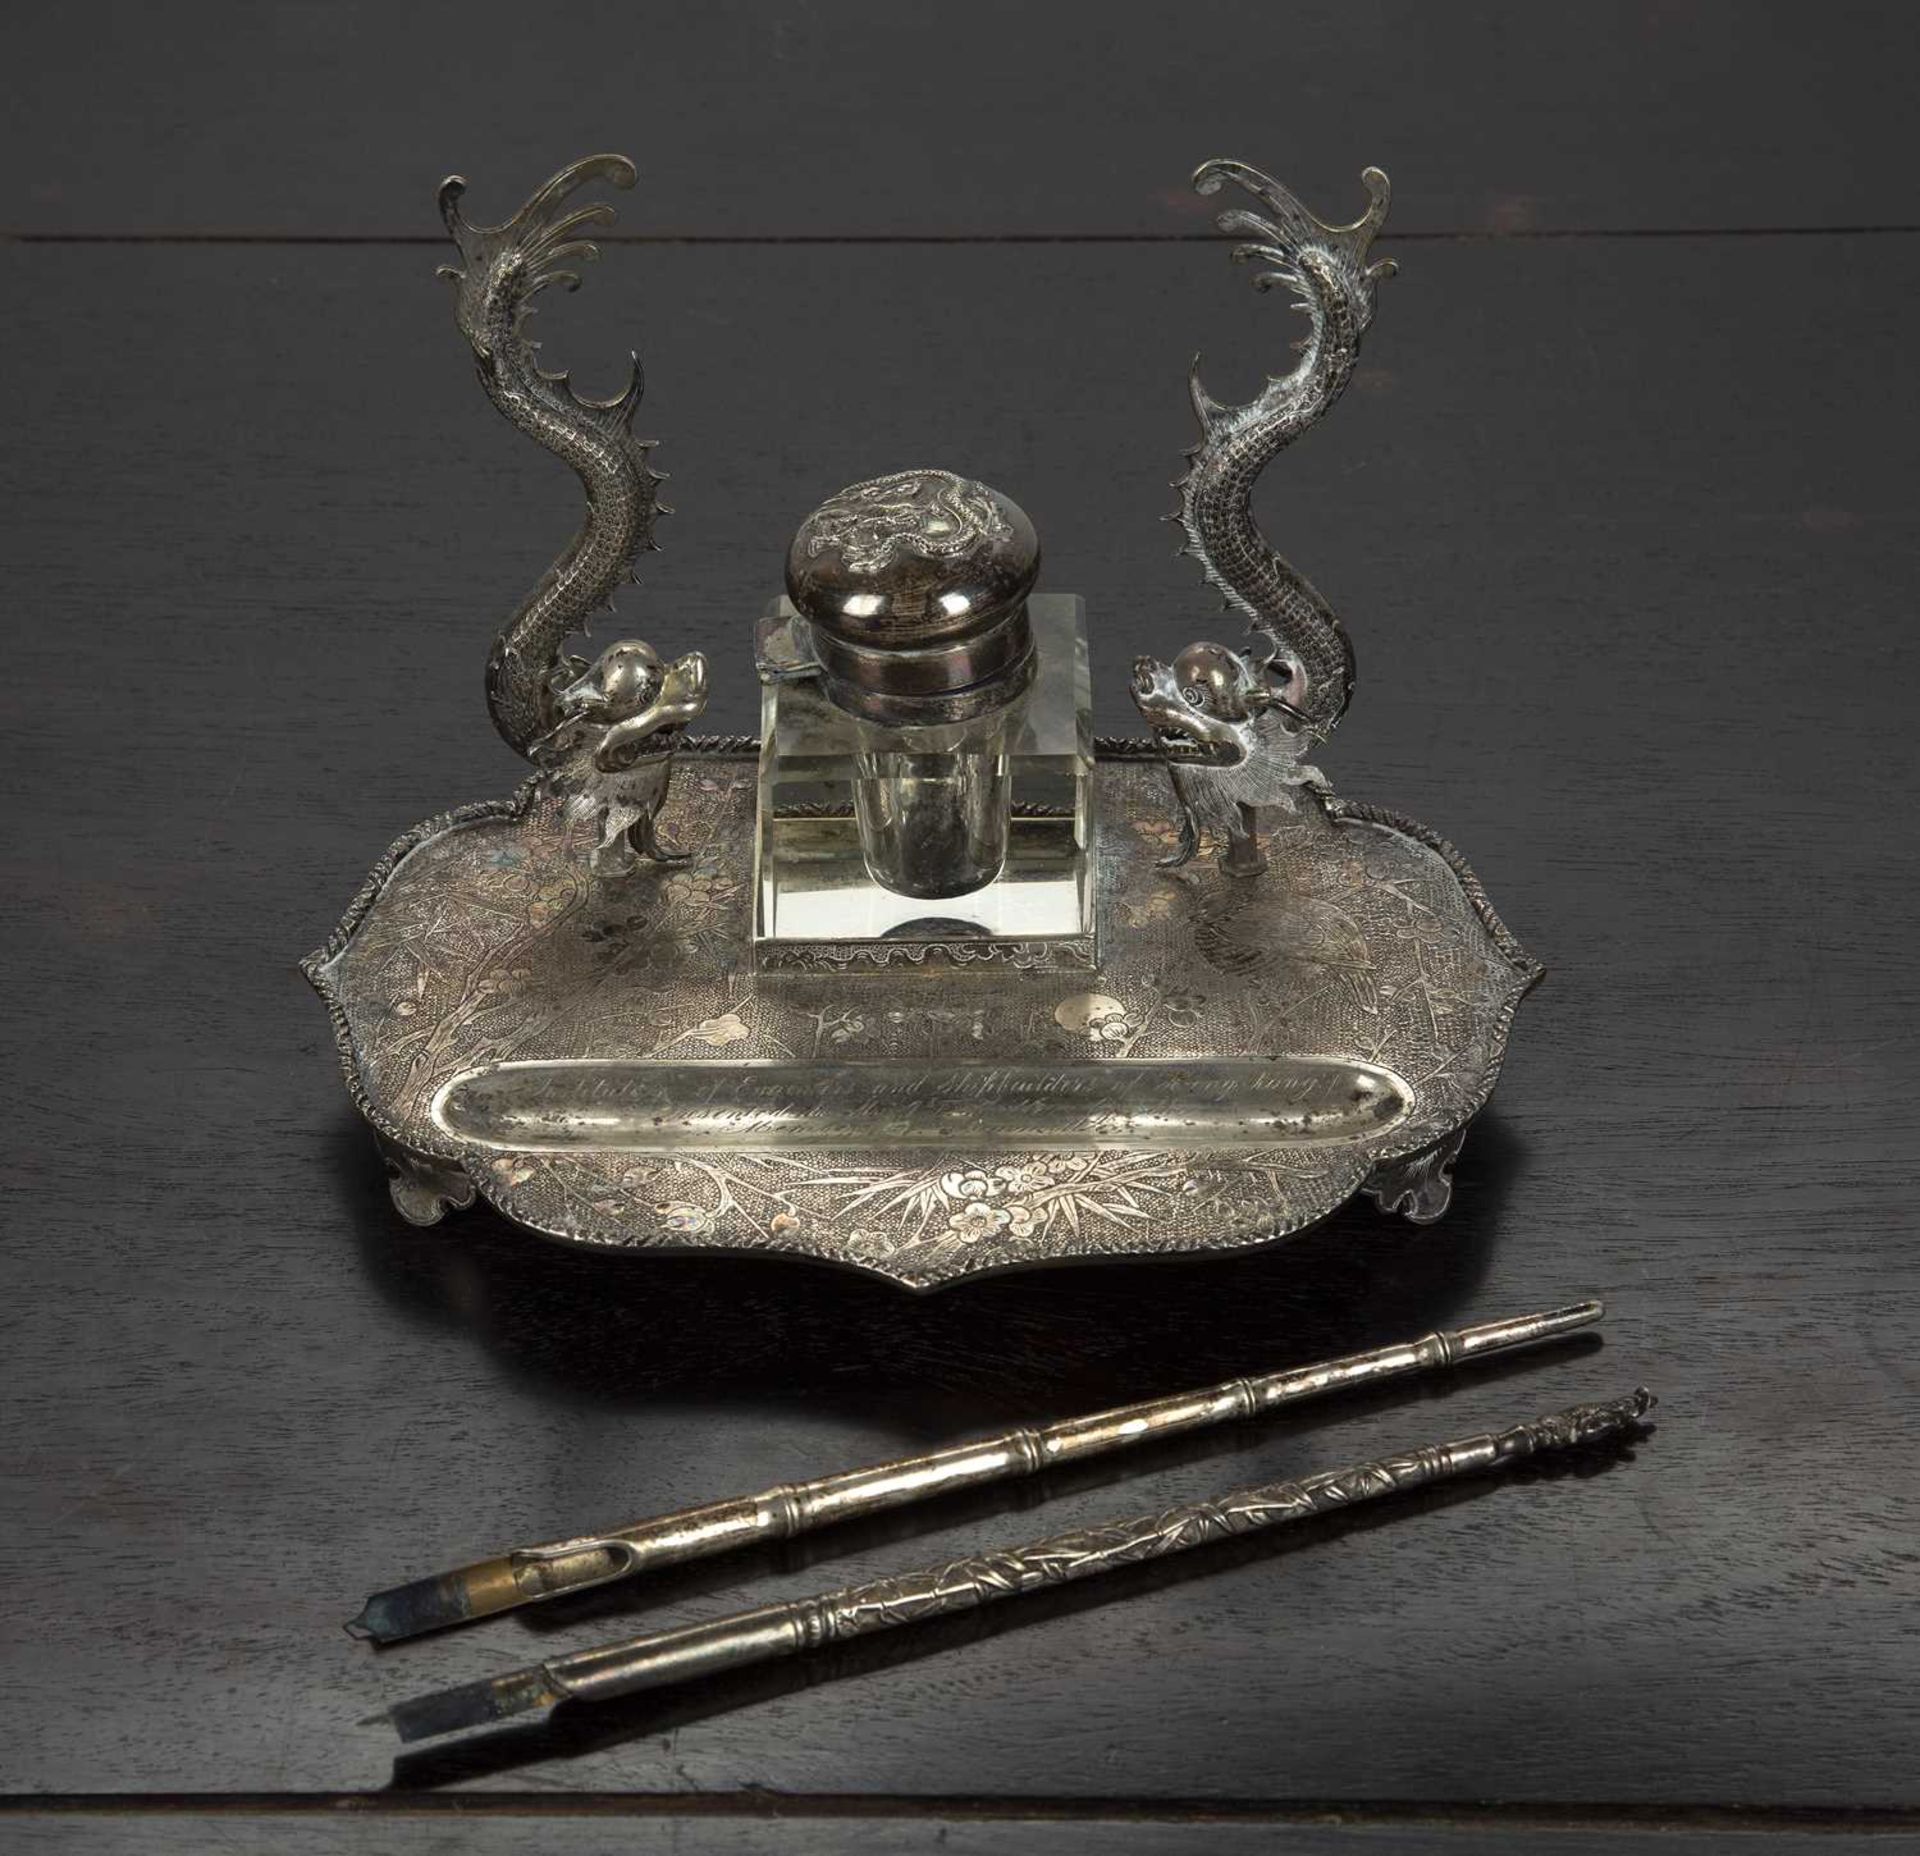 White metal/silver pen and inkstand awarded to John Finlay Miller (1869-1949) and related